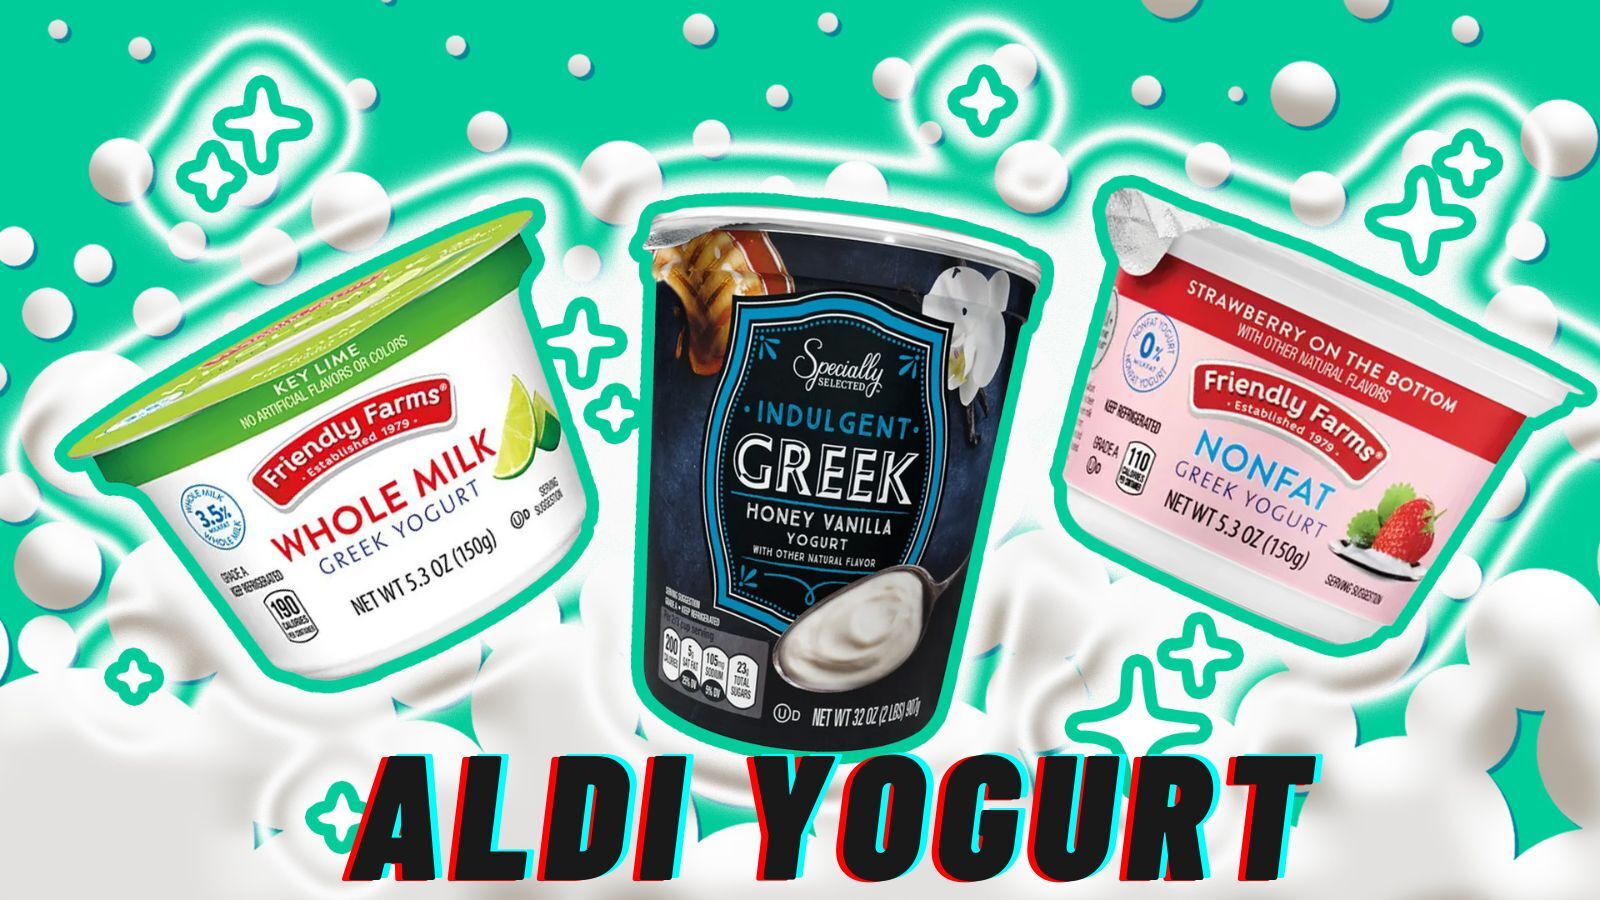 Aldi Yogurt: Everything You Want to Know Is Right Here!